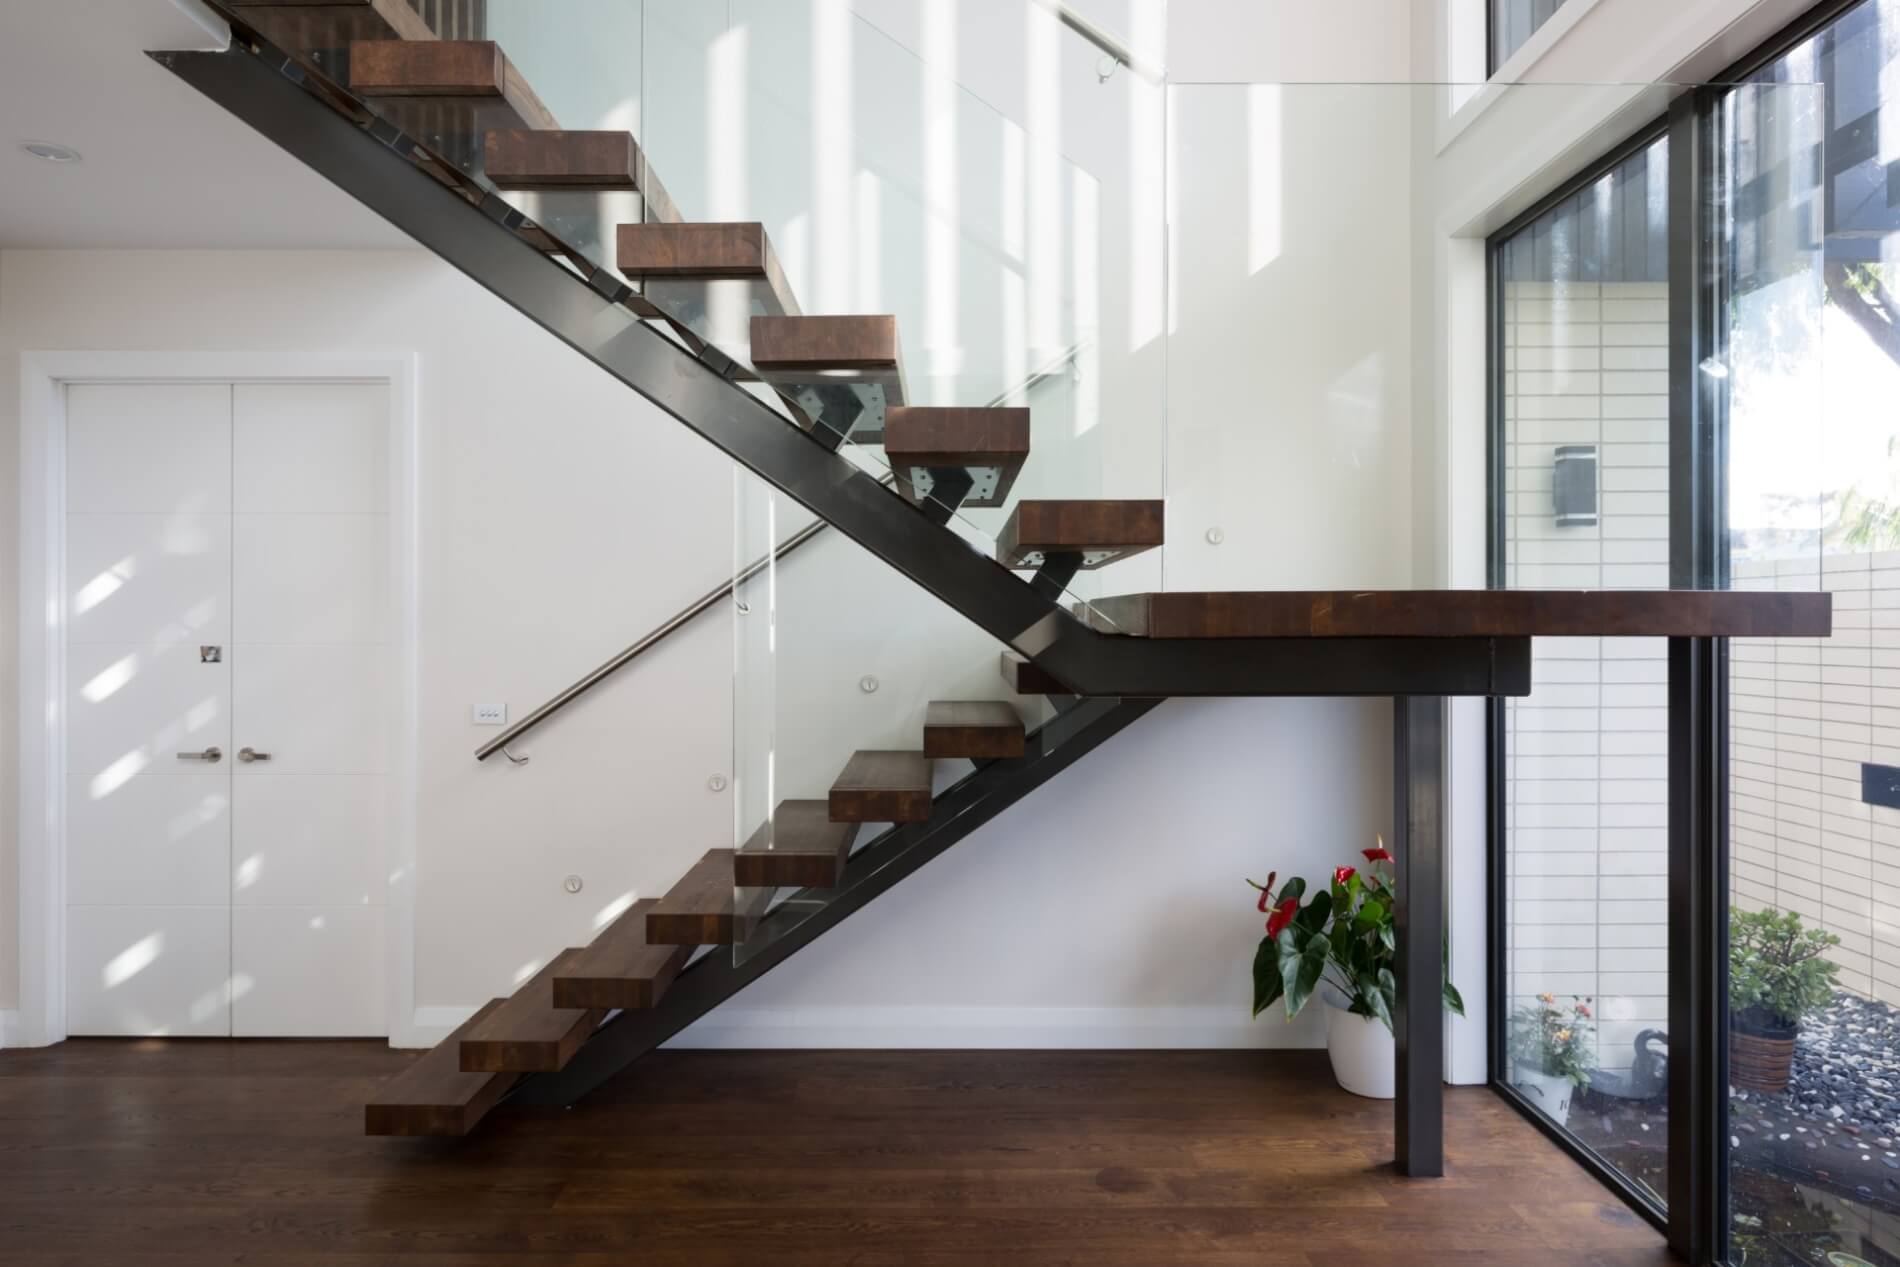 Purchasing Guide to Right Steel Staircase for Your Home